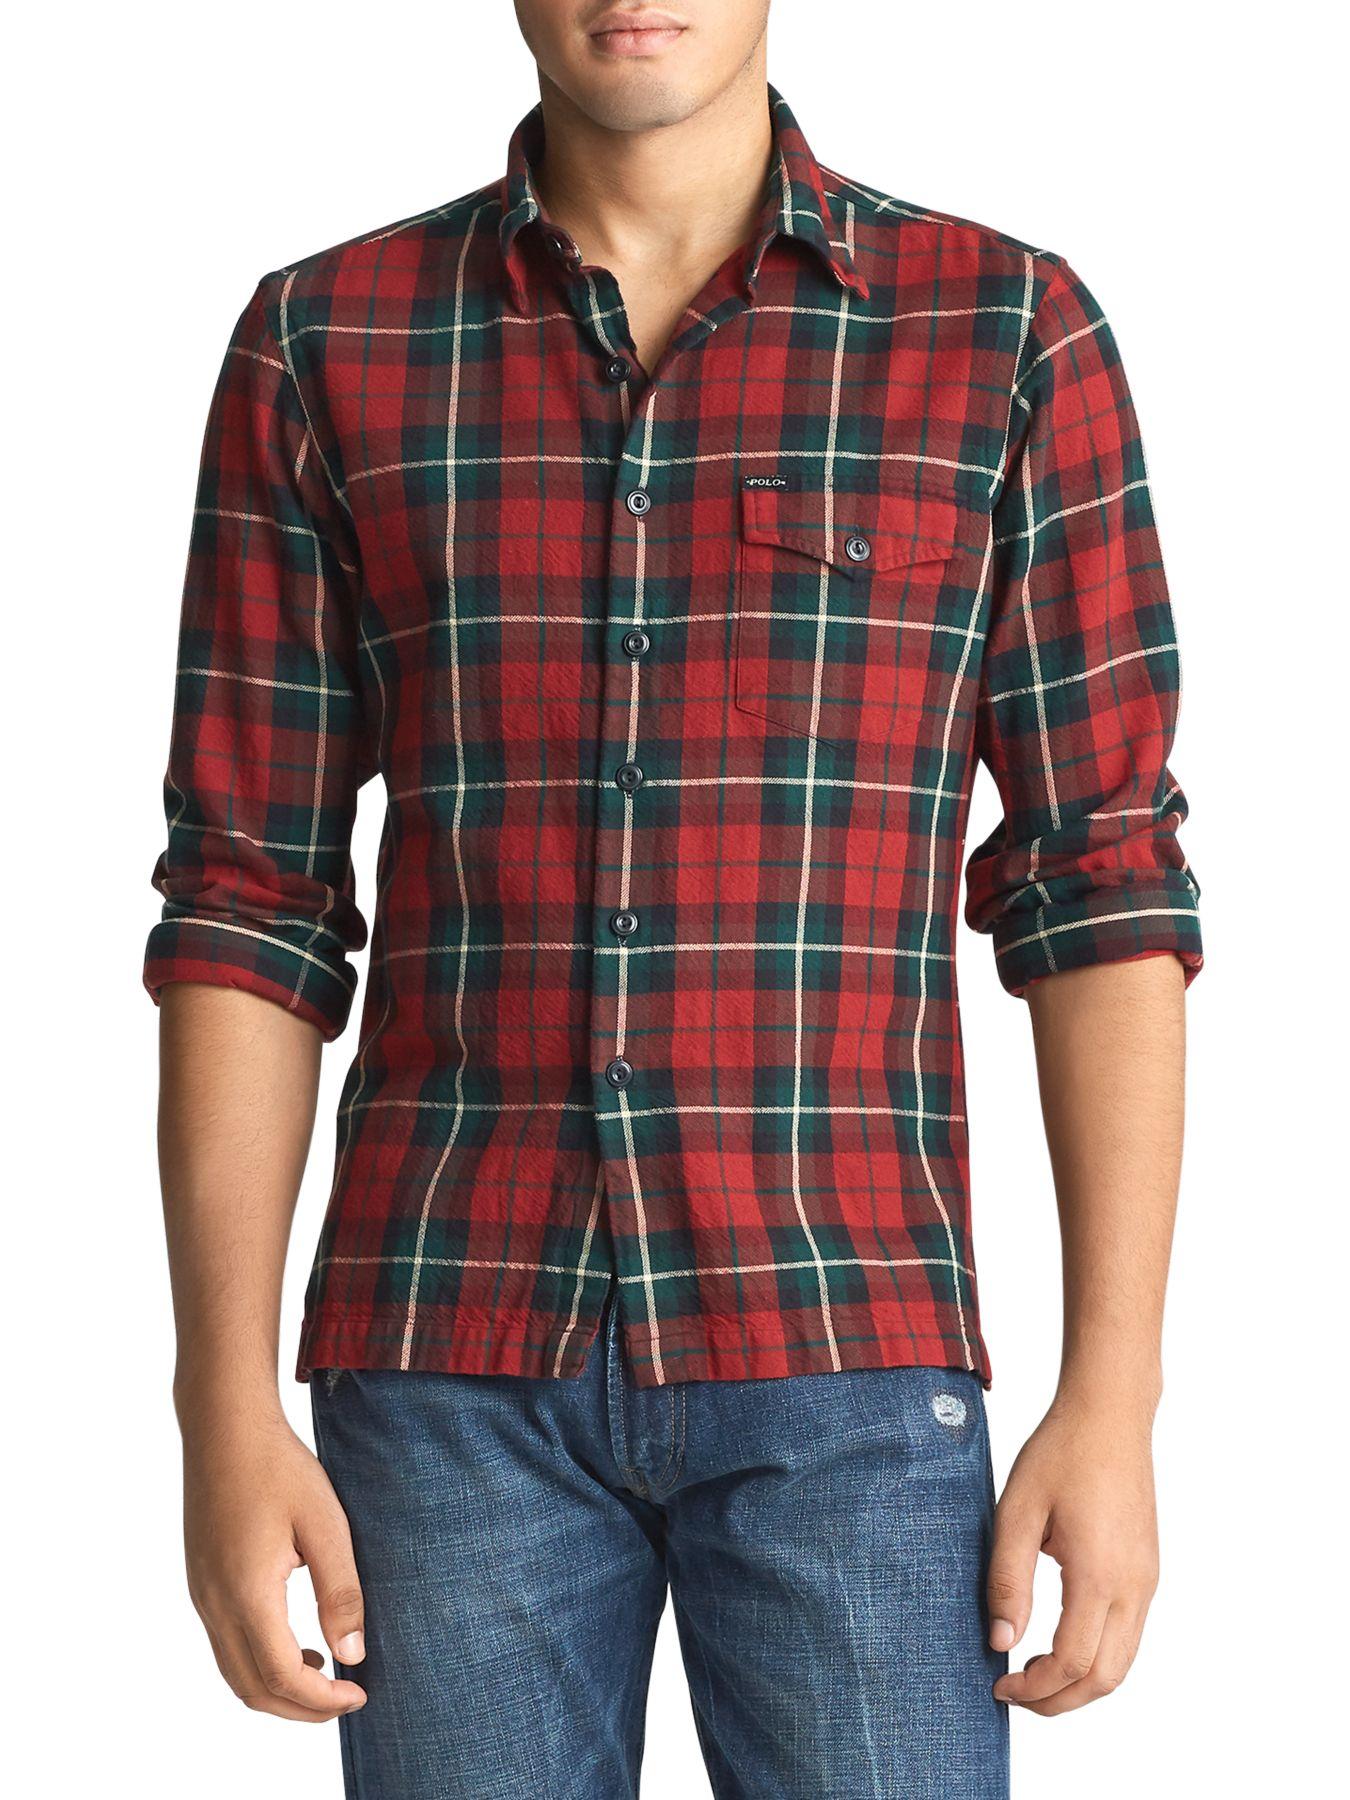 Polo Ralph Lauren Plaid Suede Elbow-patch Shirt in Red for Men | Lyst